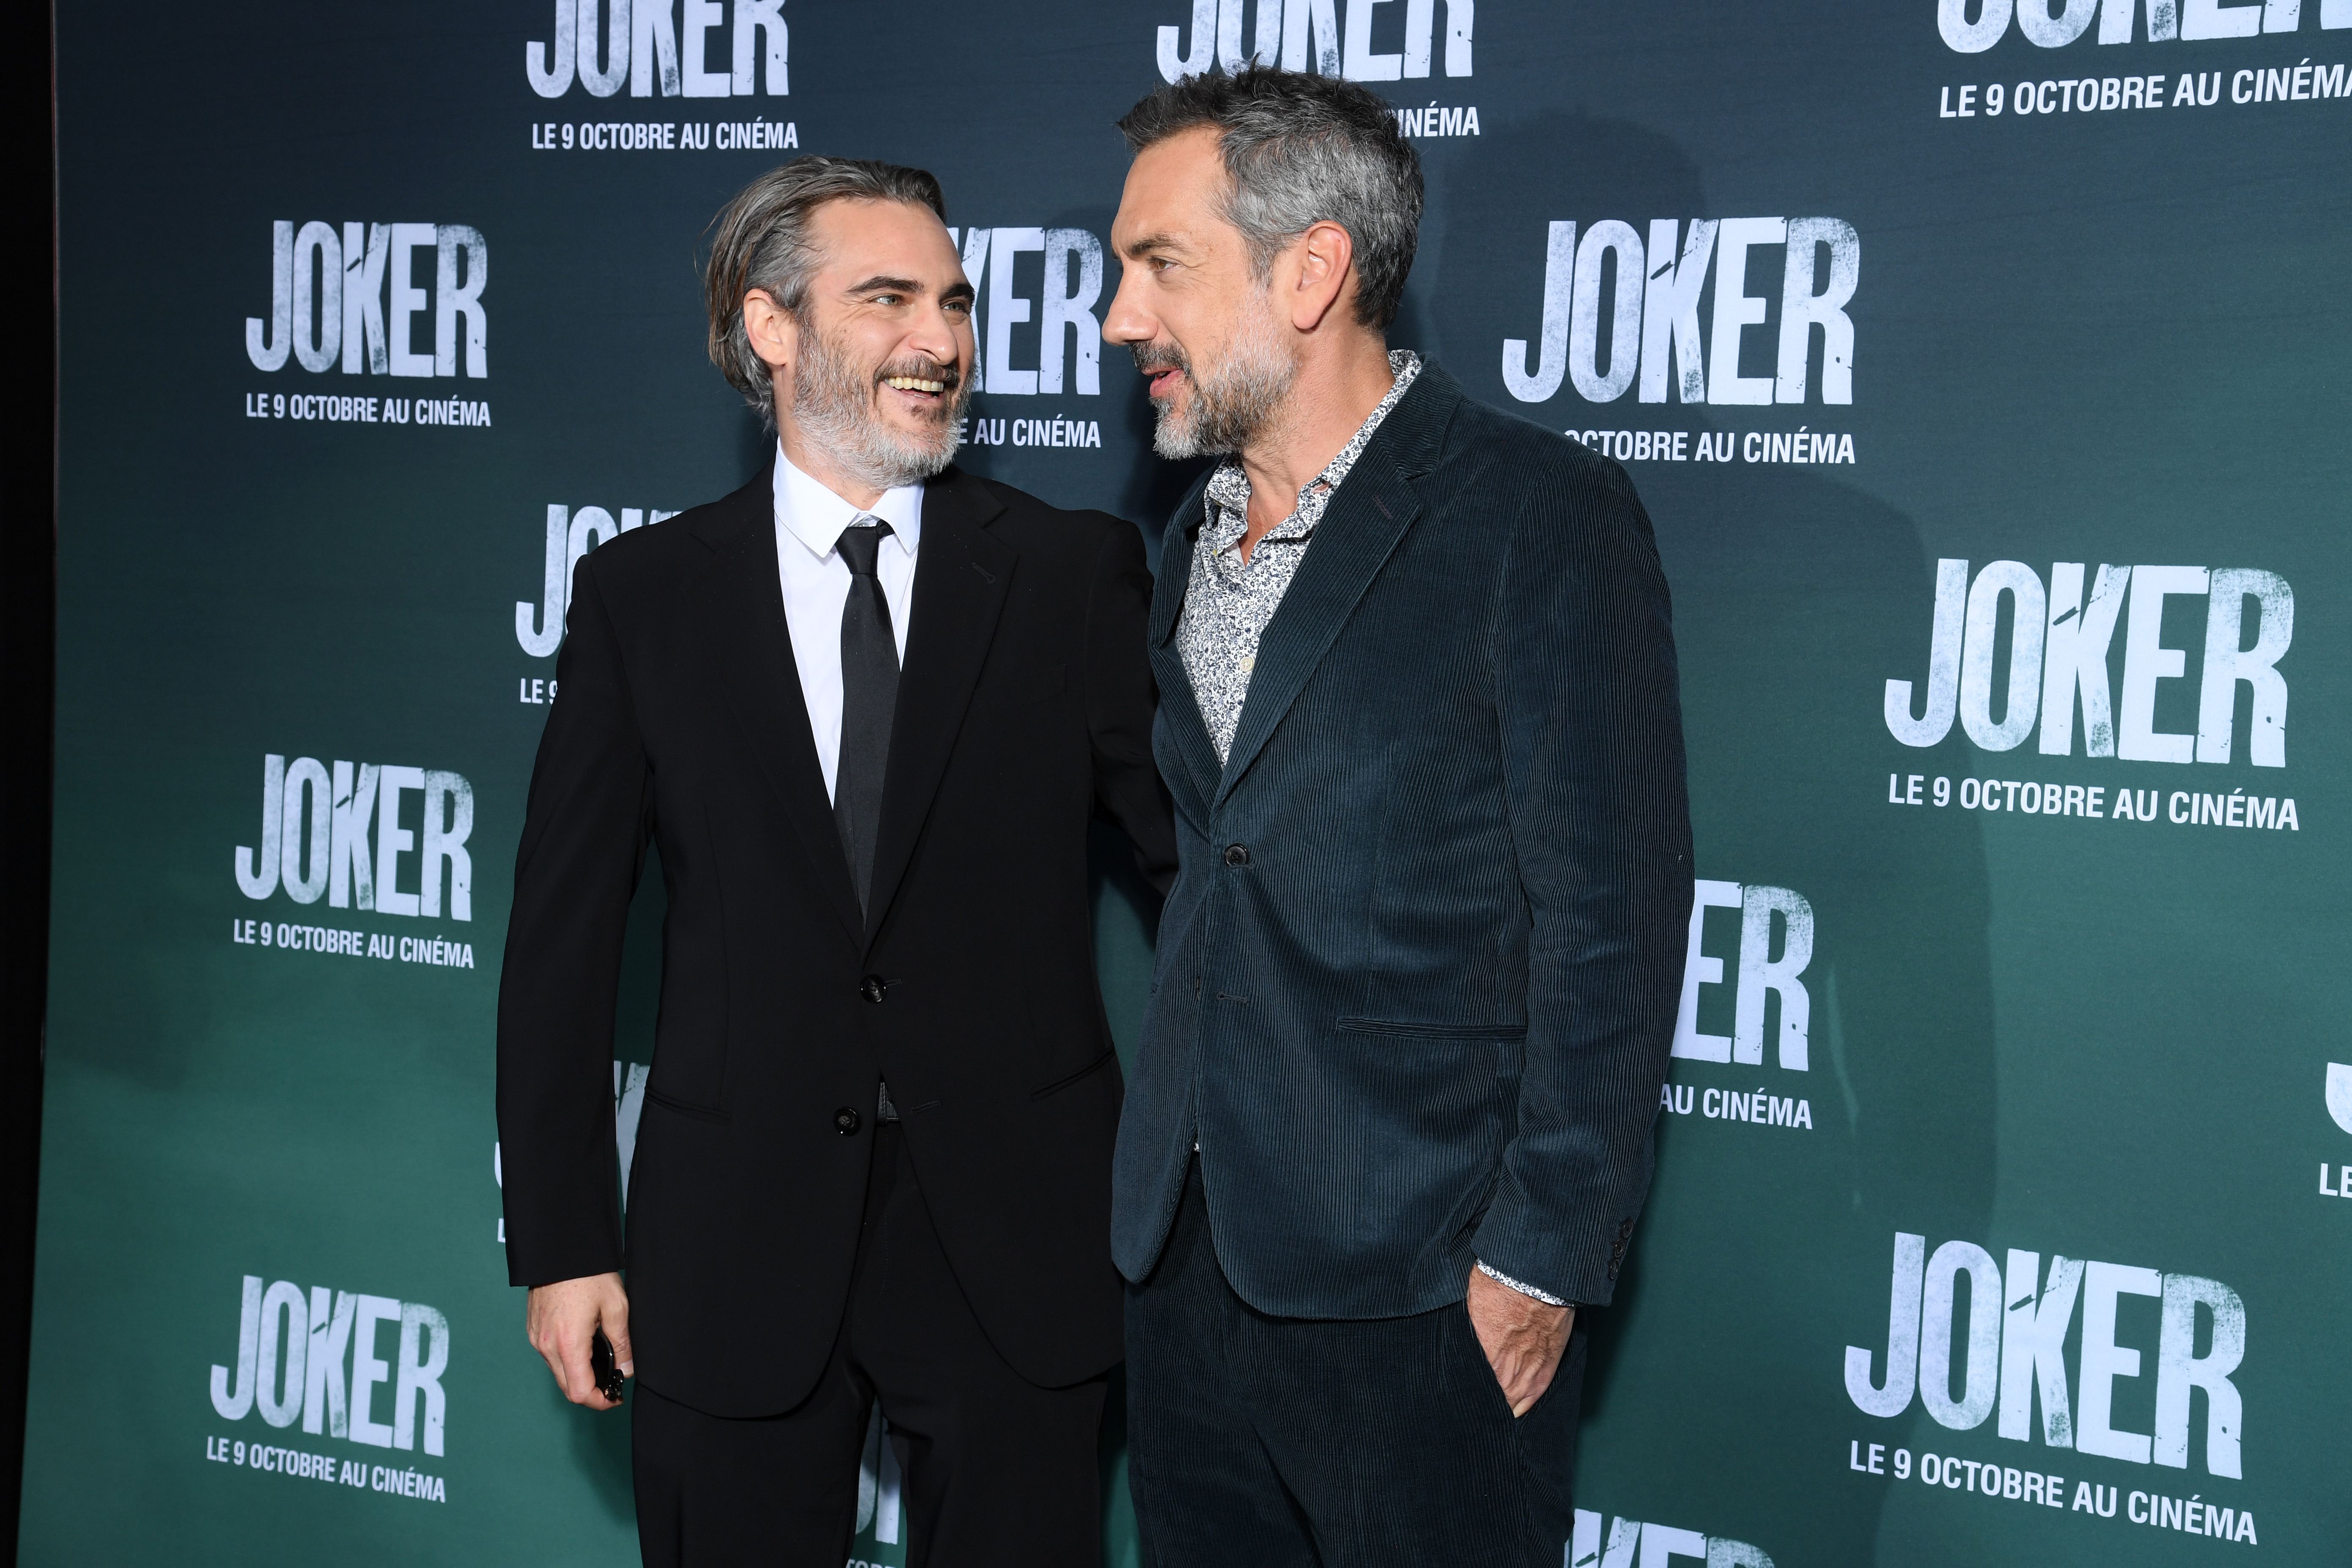 “Joker” Viewer Spooks Audience By Clapping & Screaming During Film